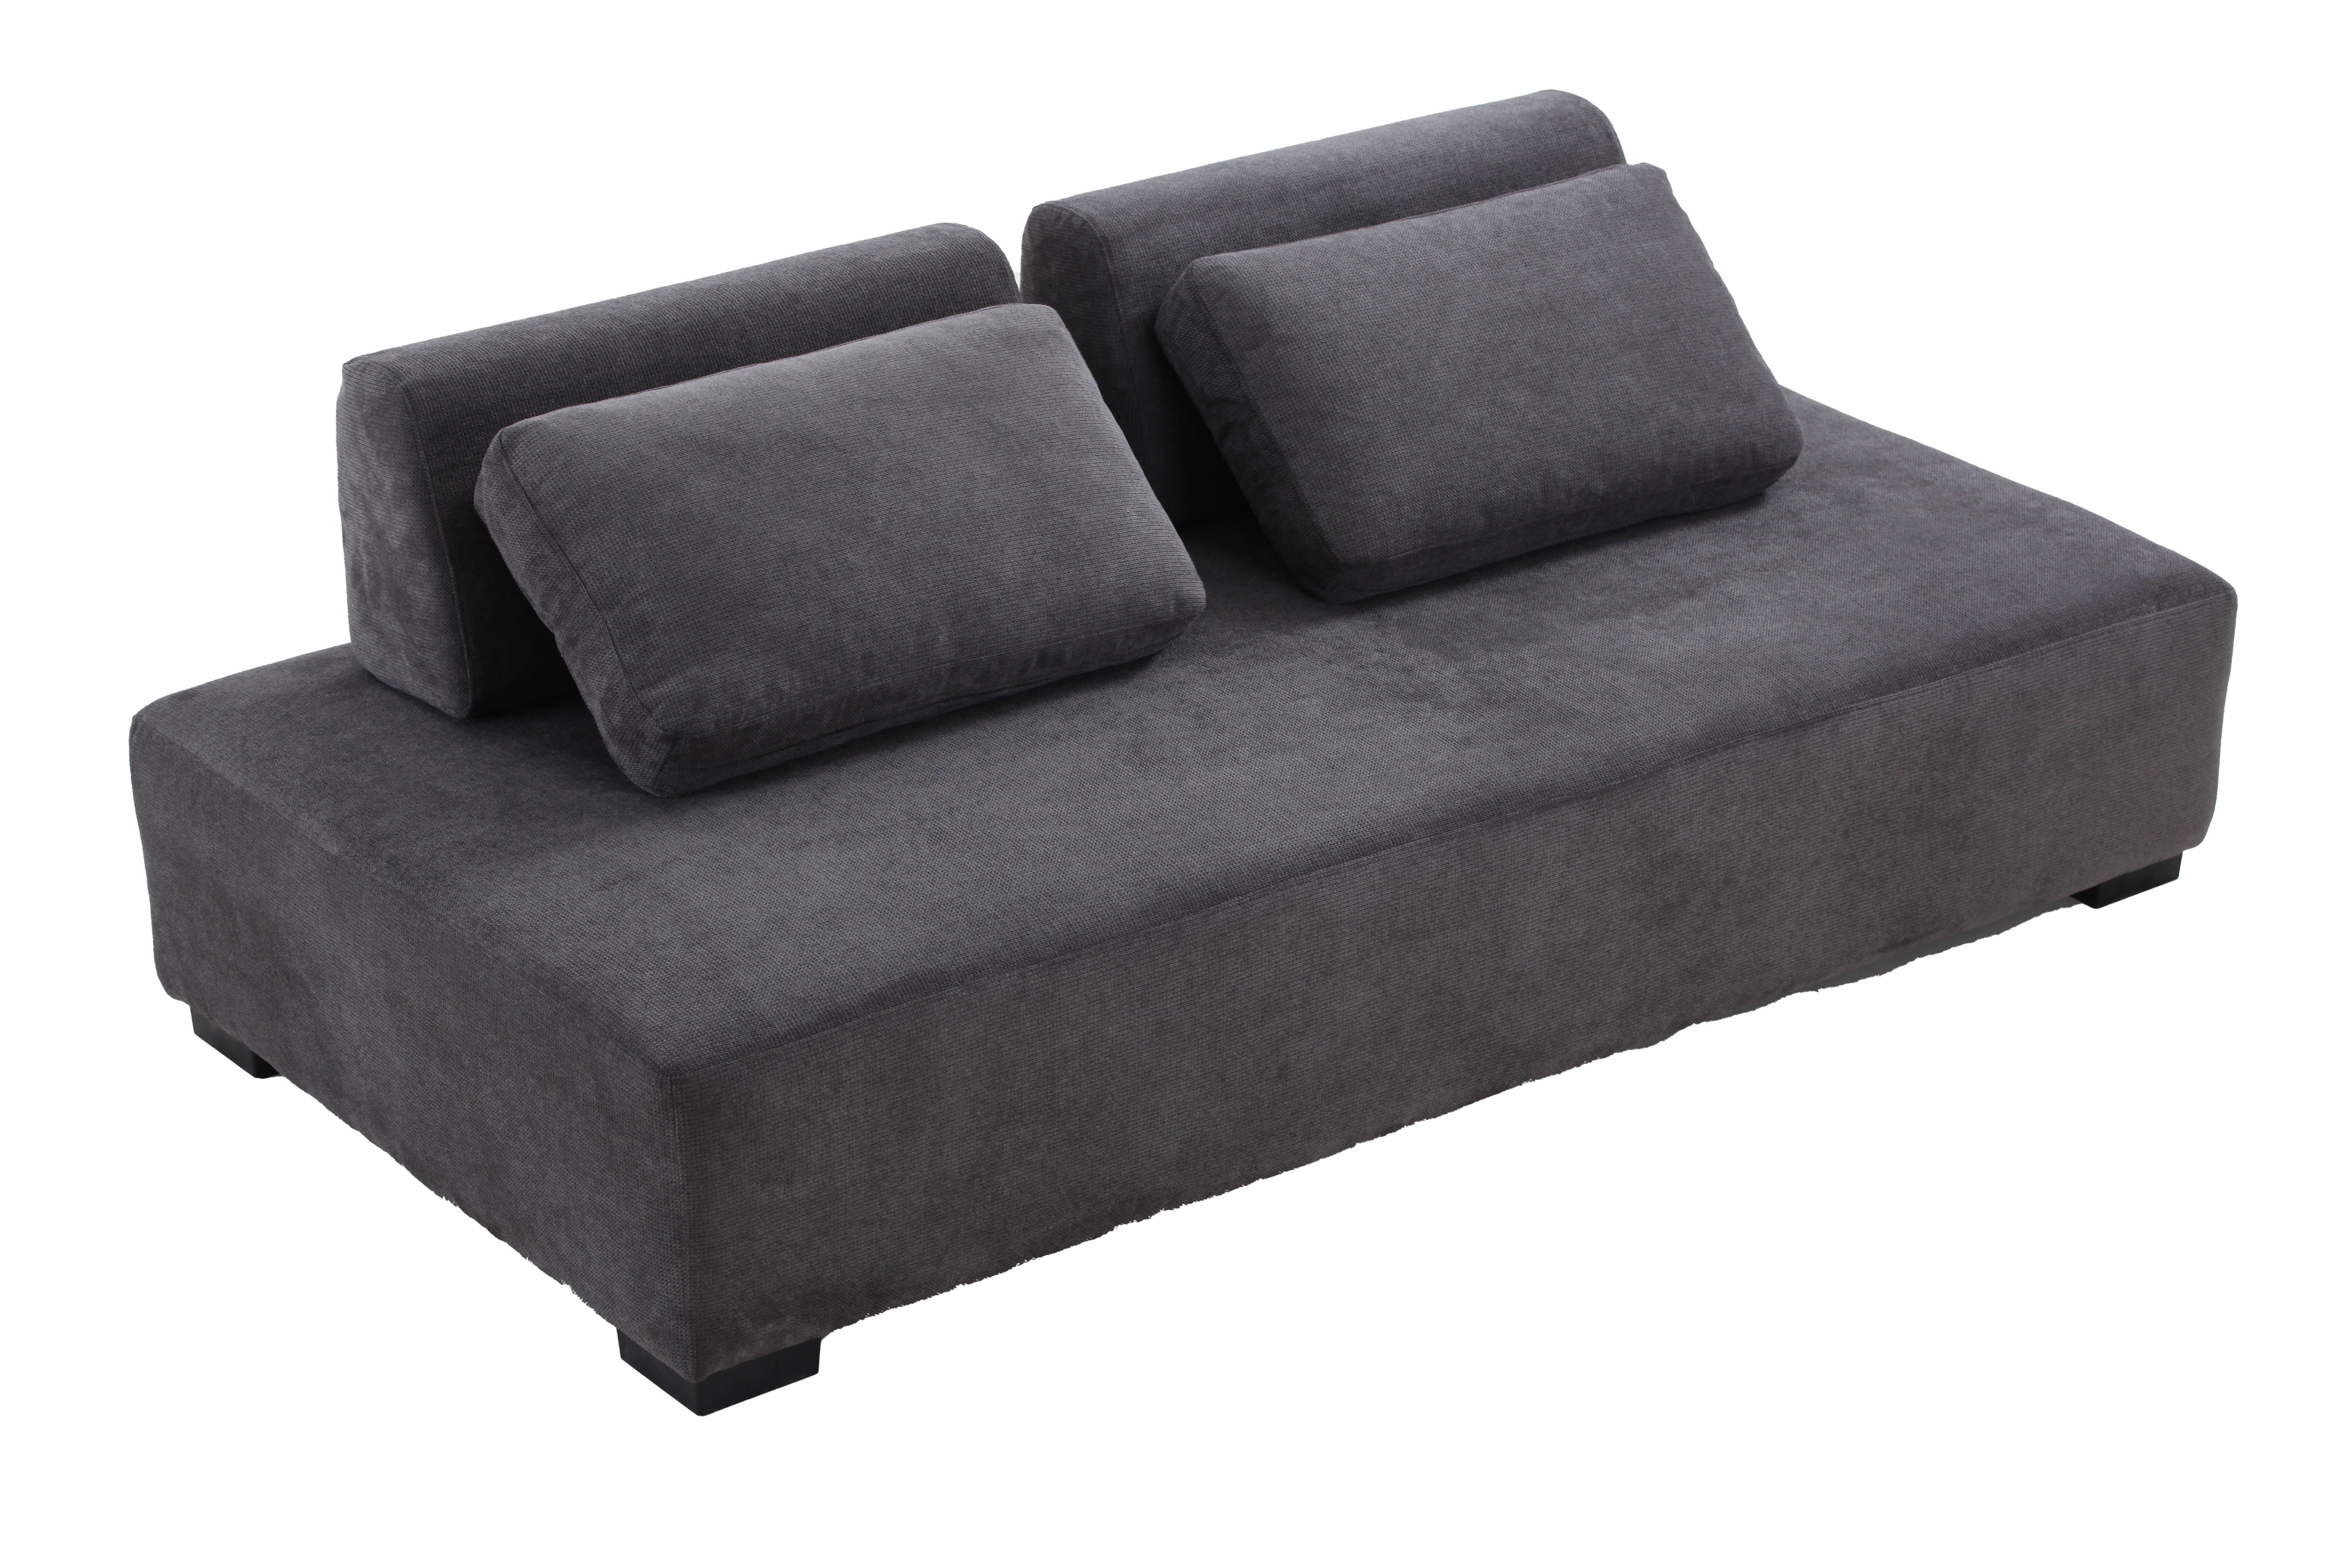 85.4'' Minimalist Sofa 3-Seater Couch For Apartment, Business Lounge, Waiting Area, Hotel Lobby Gray